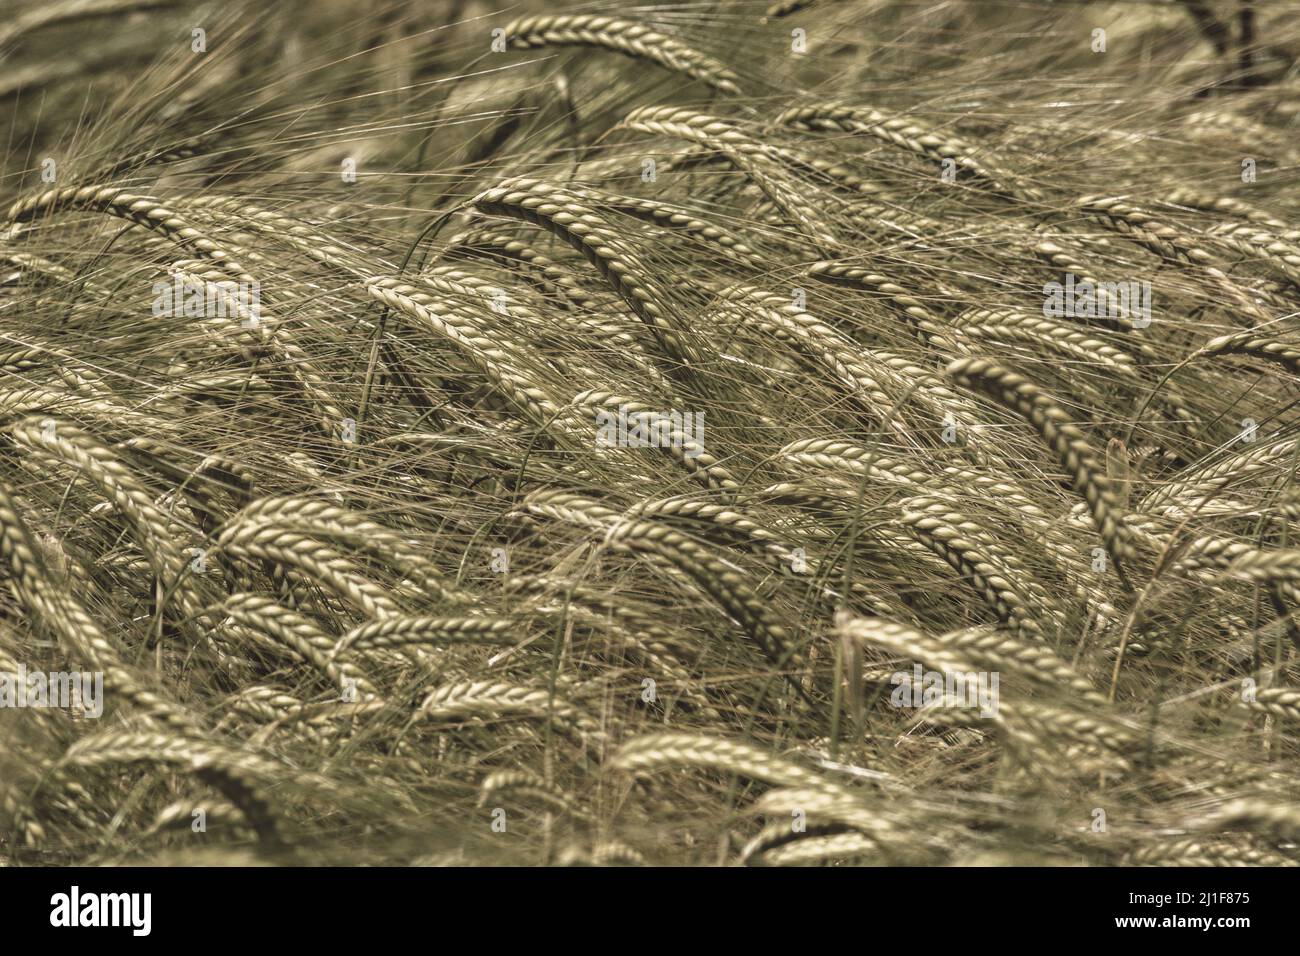 Heads of green barley (Hordeum vulgare) growing. Focus on heads in a band across horizontal plane left to right of picture. Metaphor food security. Stock Photo